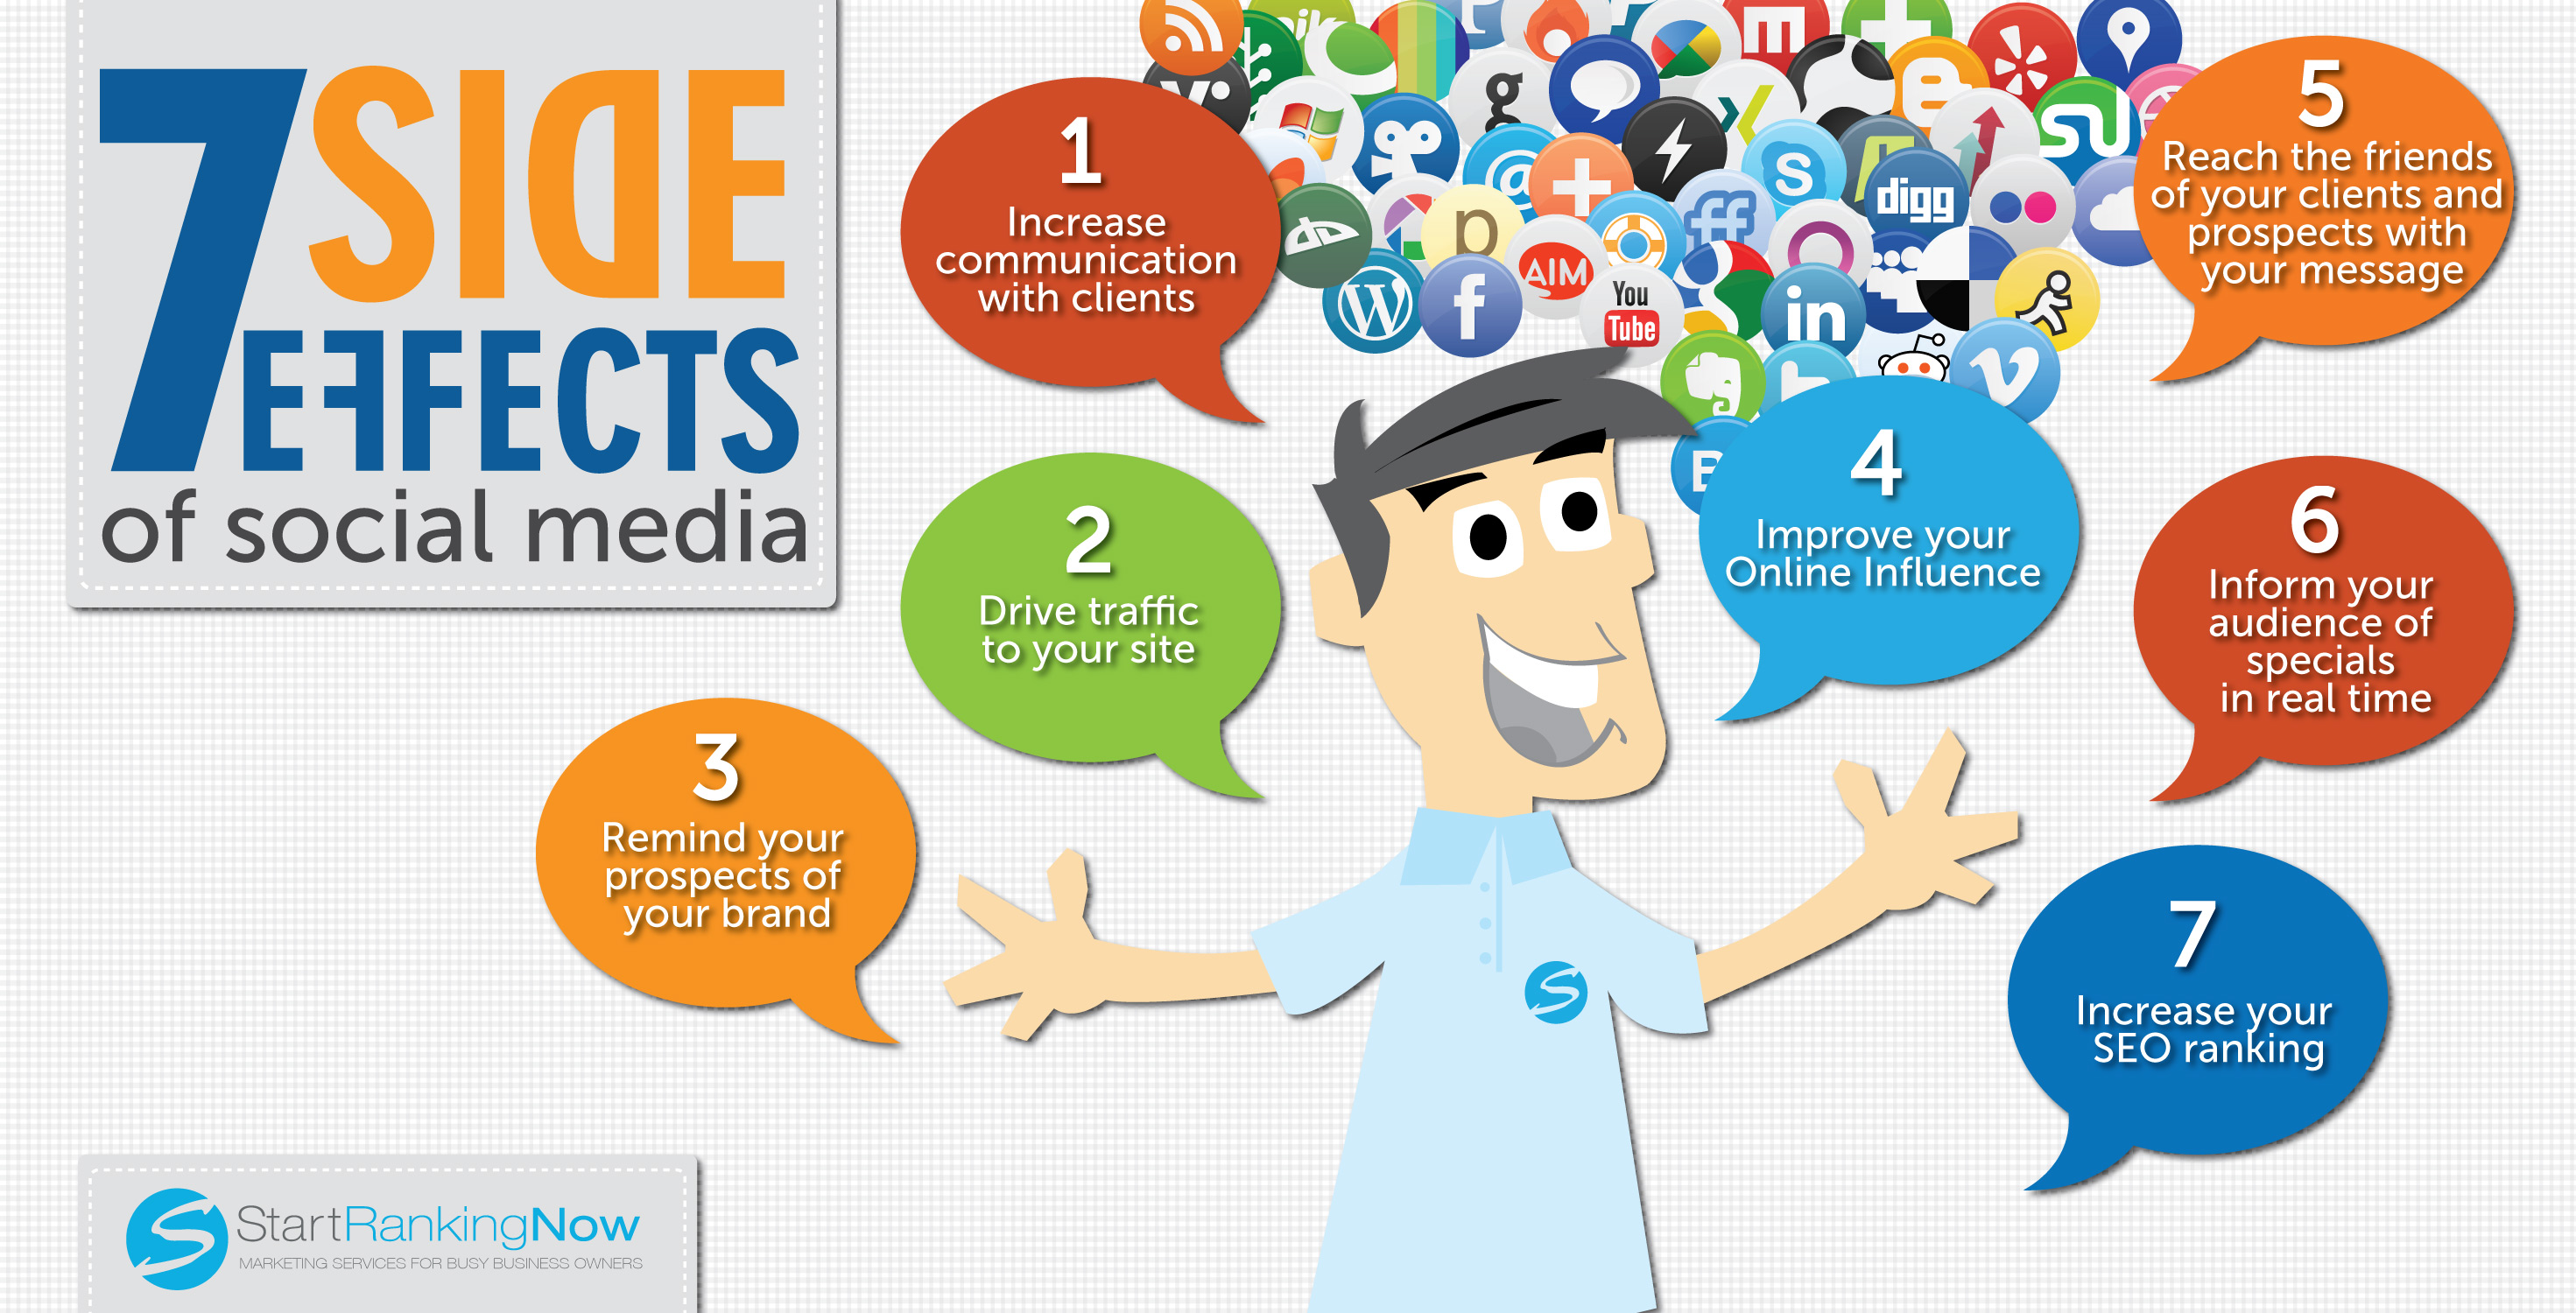 7 Side Effects Of Social Media 502928c1e4bc7 